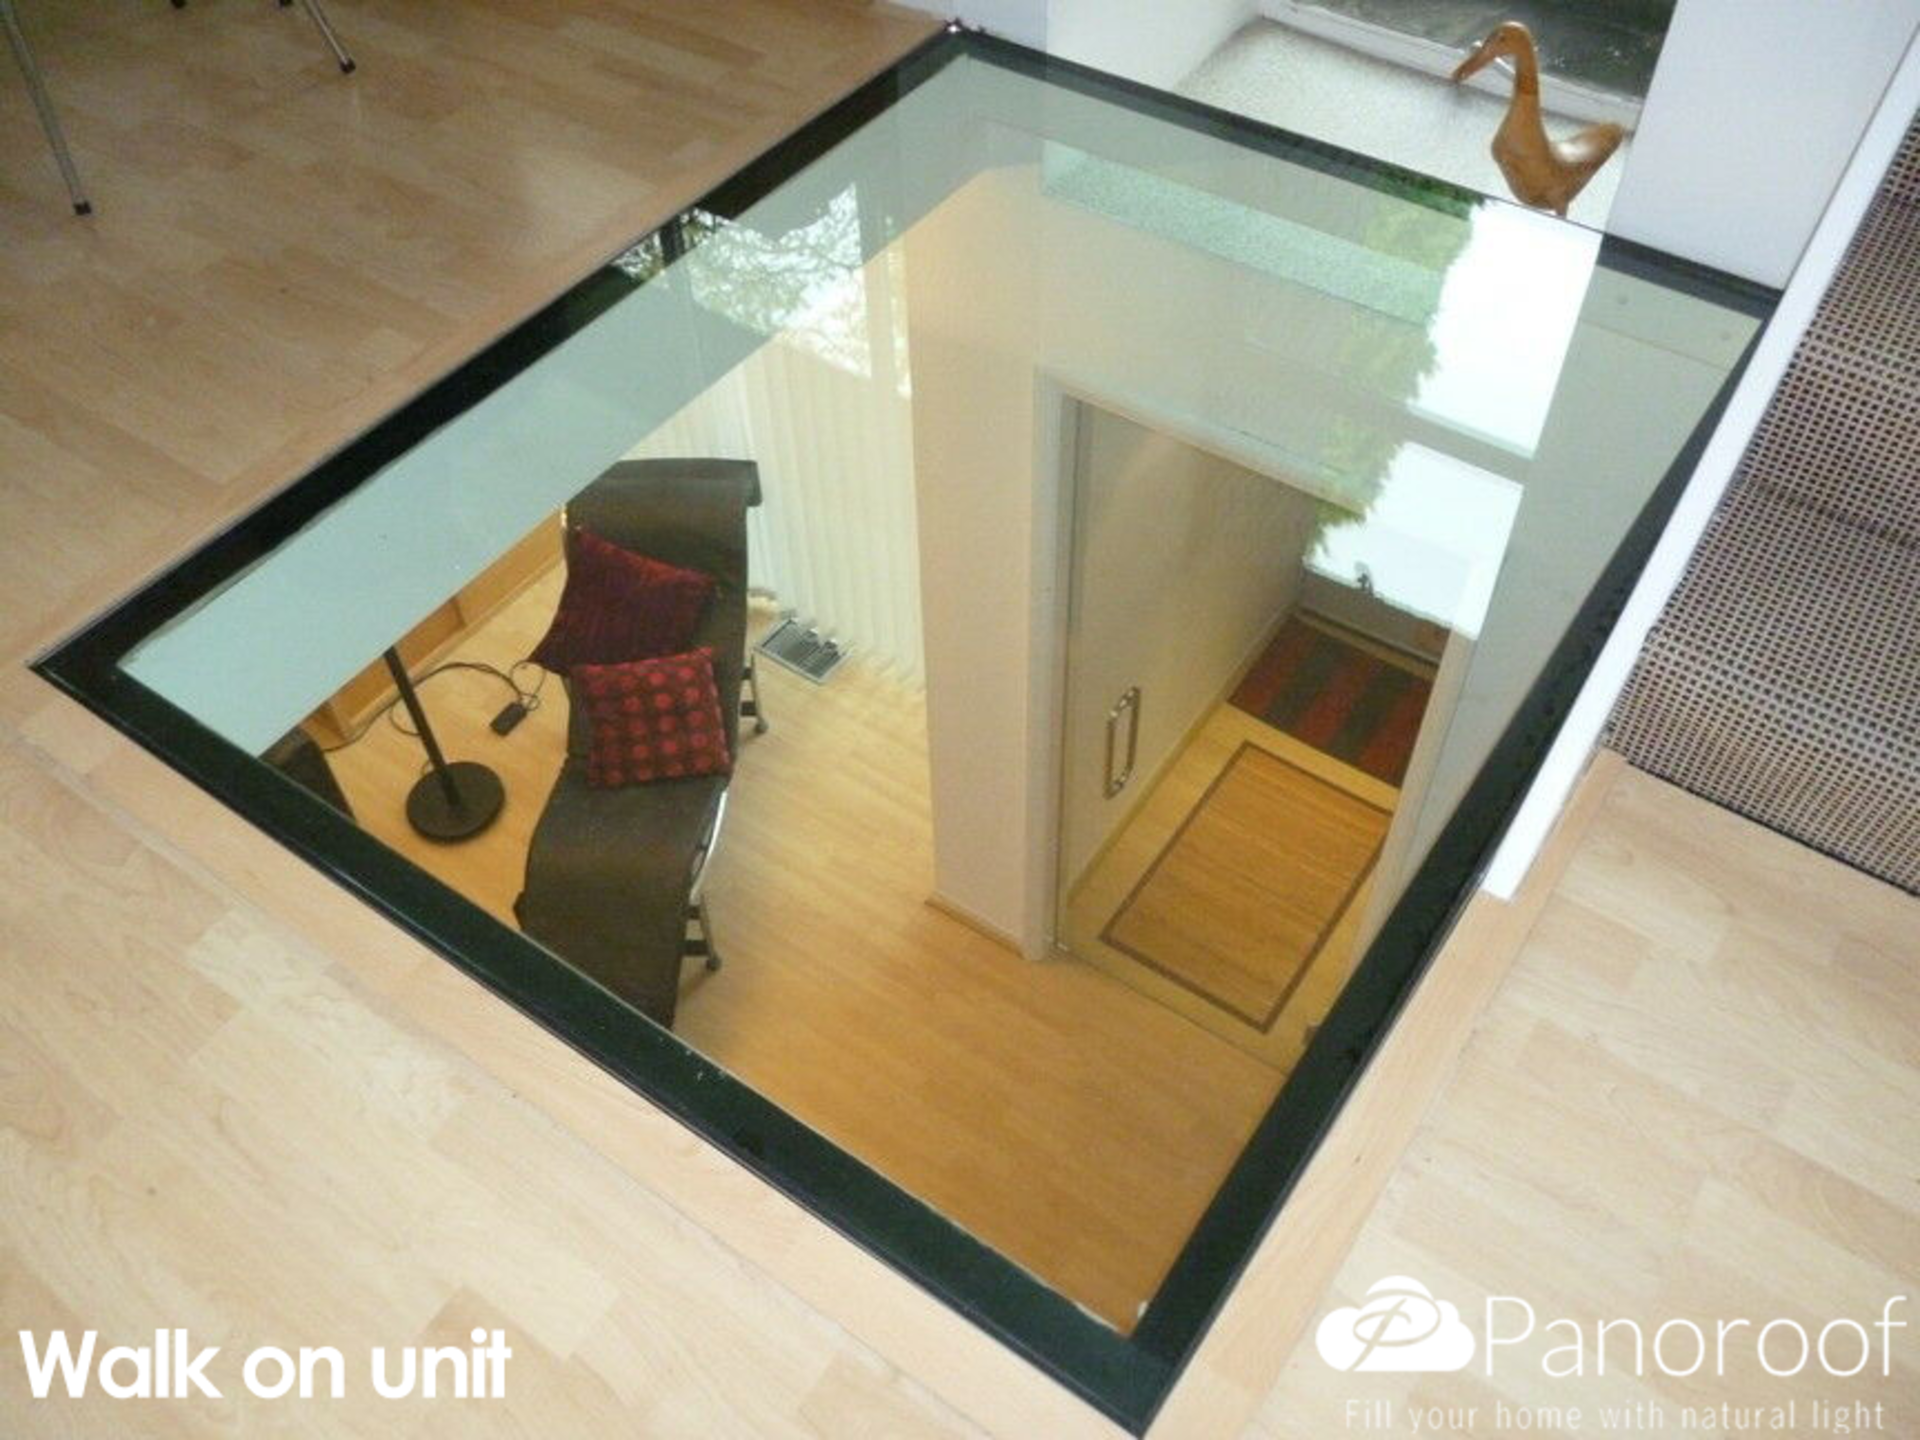 WALK ON UNIT , Panoroof Double Glazed 1000X1500 D/G WALK ON (inside Size Visable glass area)